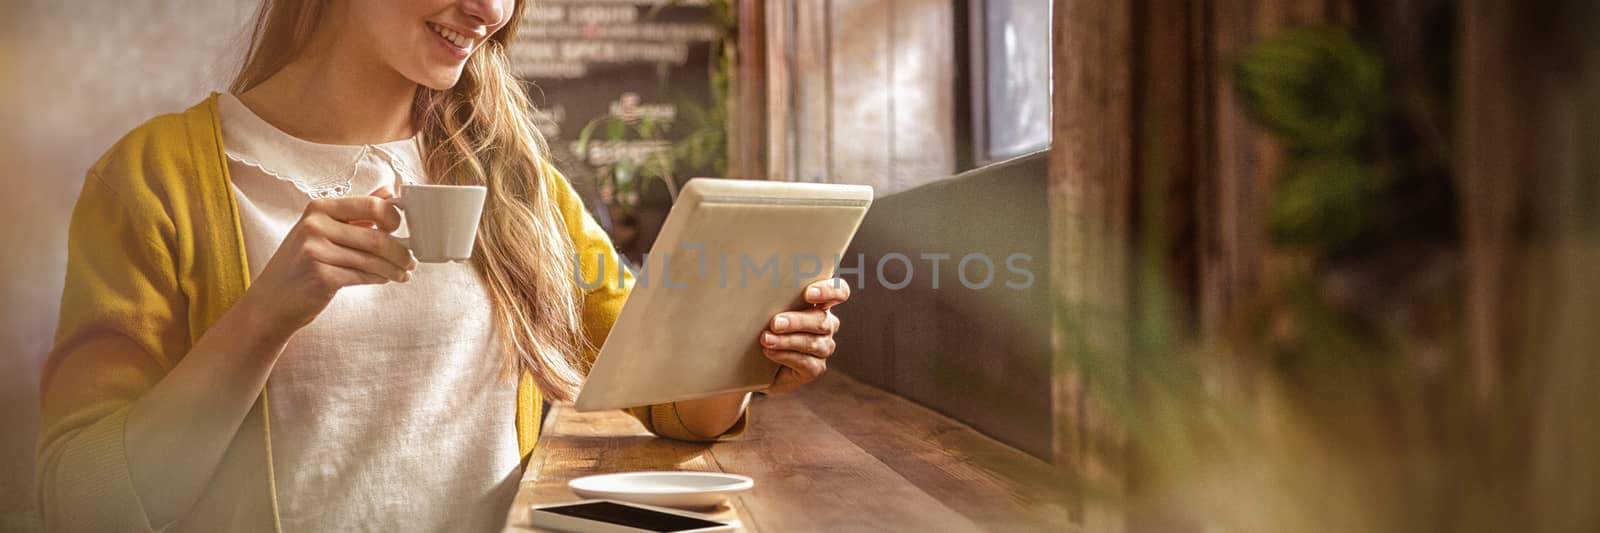 Smiling woman drinking coffee and using tablet by Wavebreakmedia